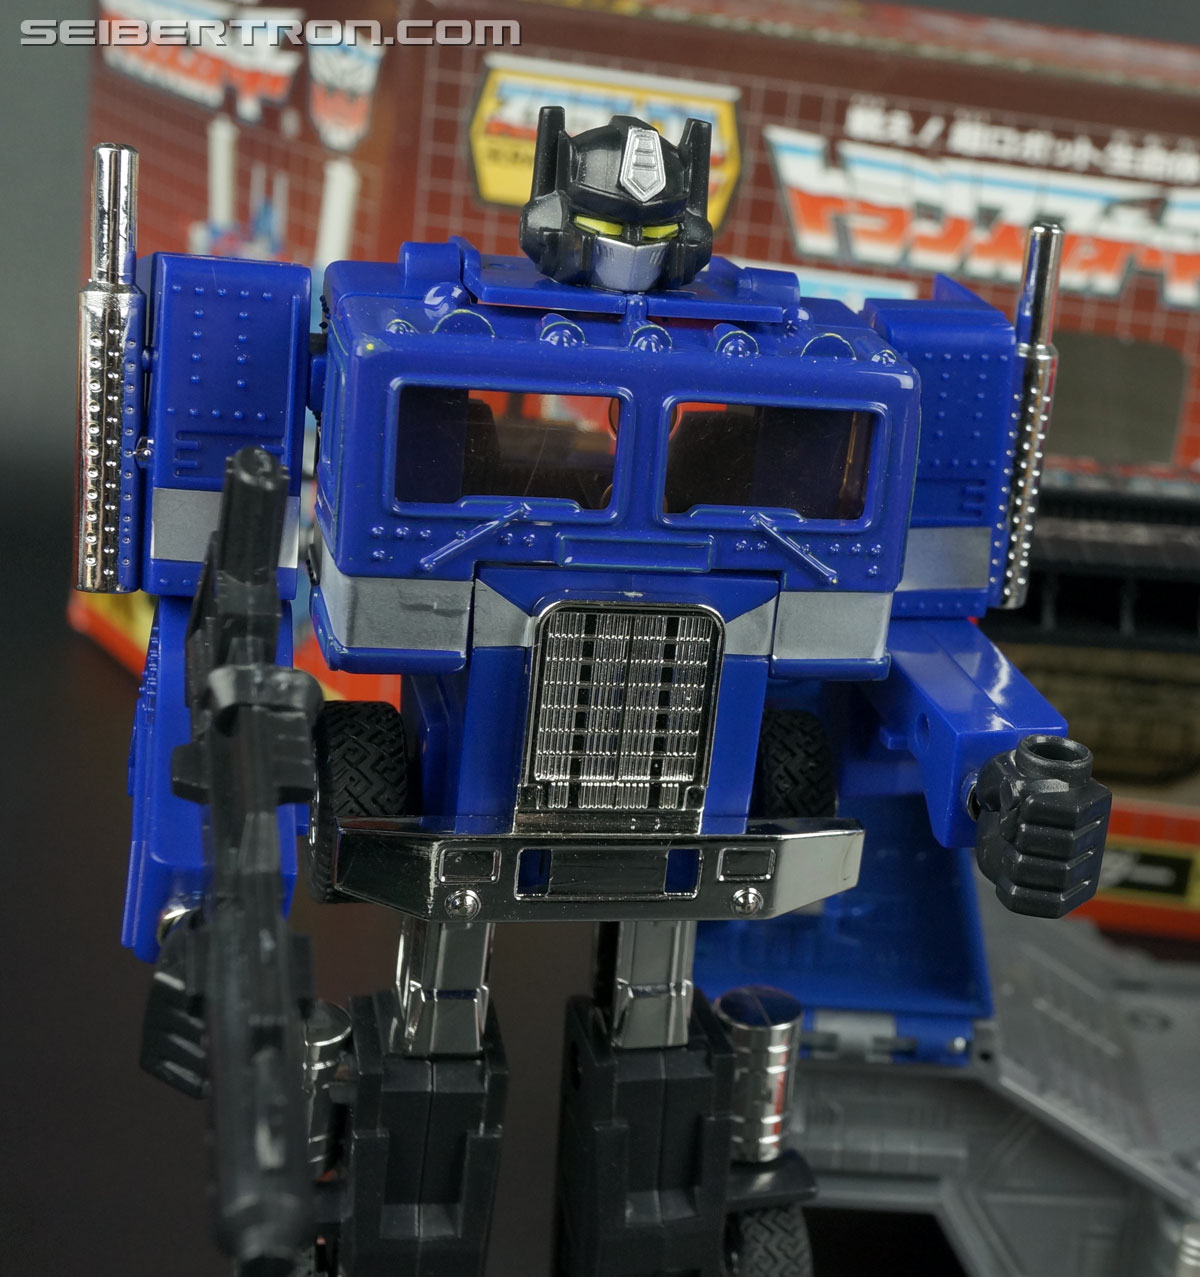 Transformers Generation One Diaclone Ultra Magnus (Movie Preview Version Ultra Magnus) (Image #32 of 203)